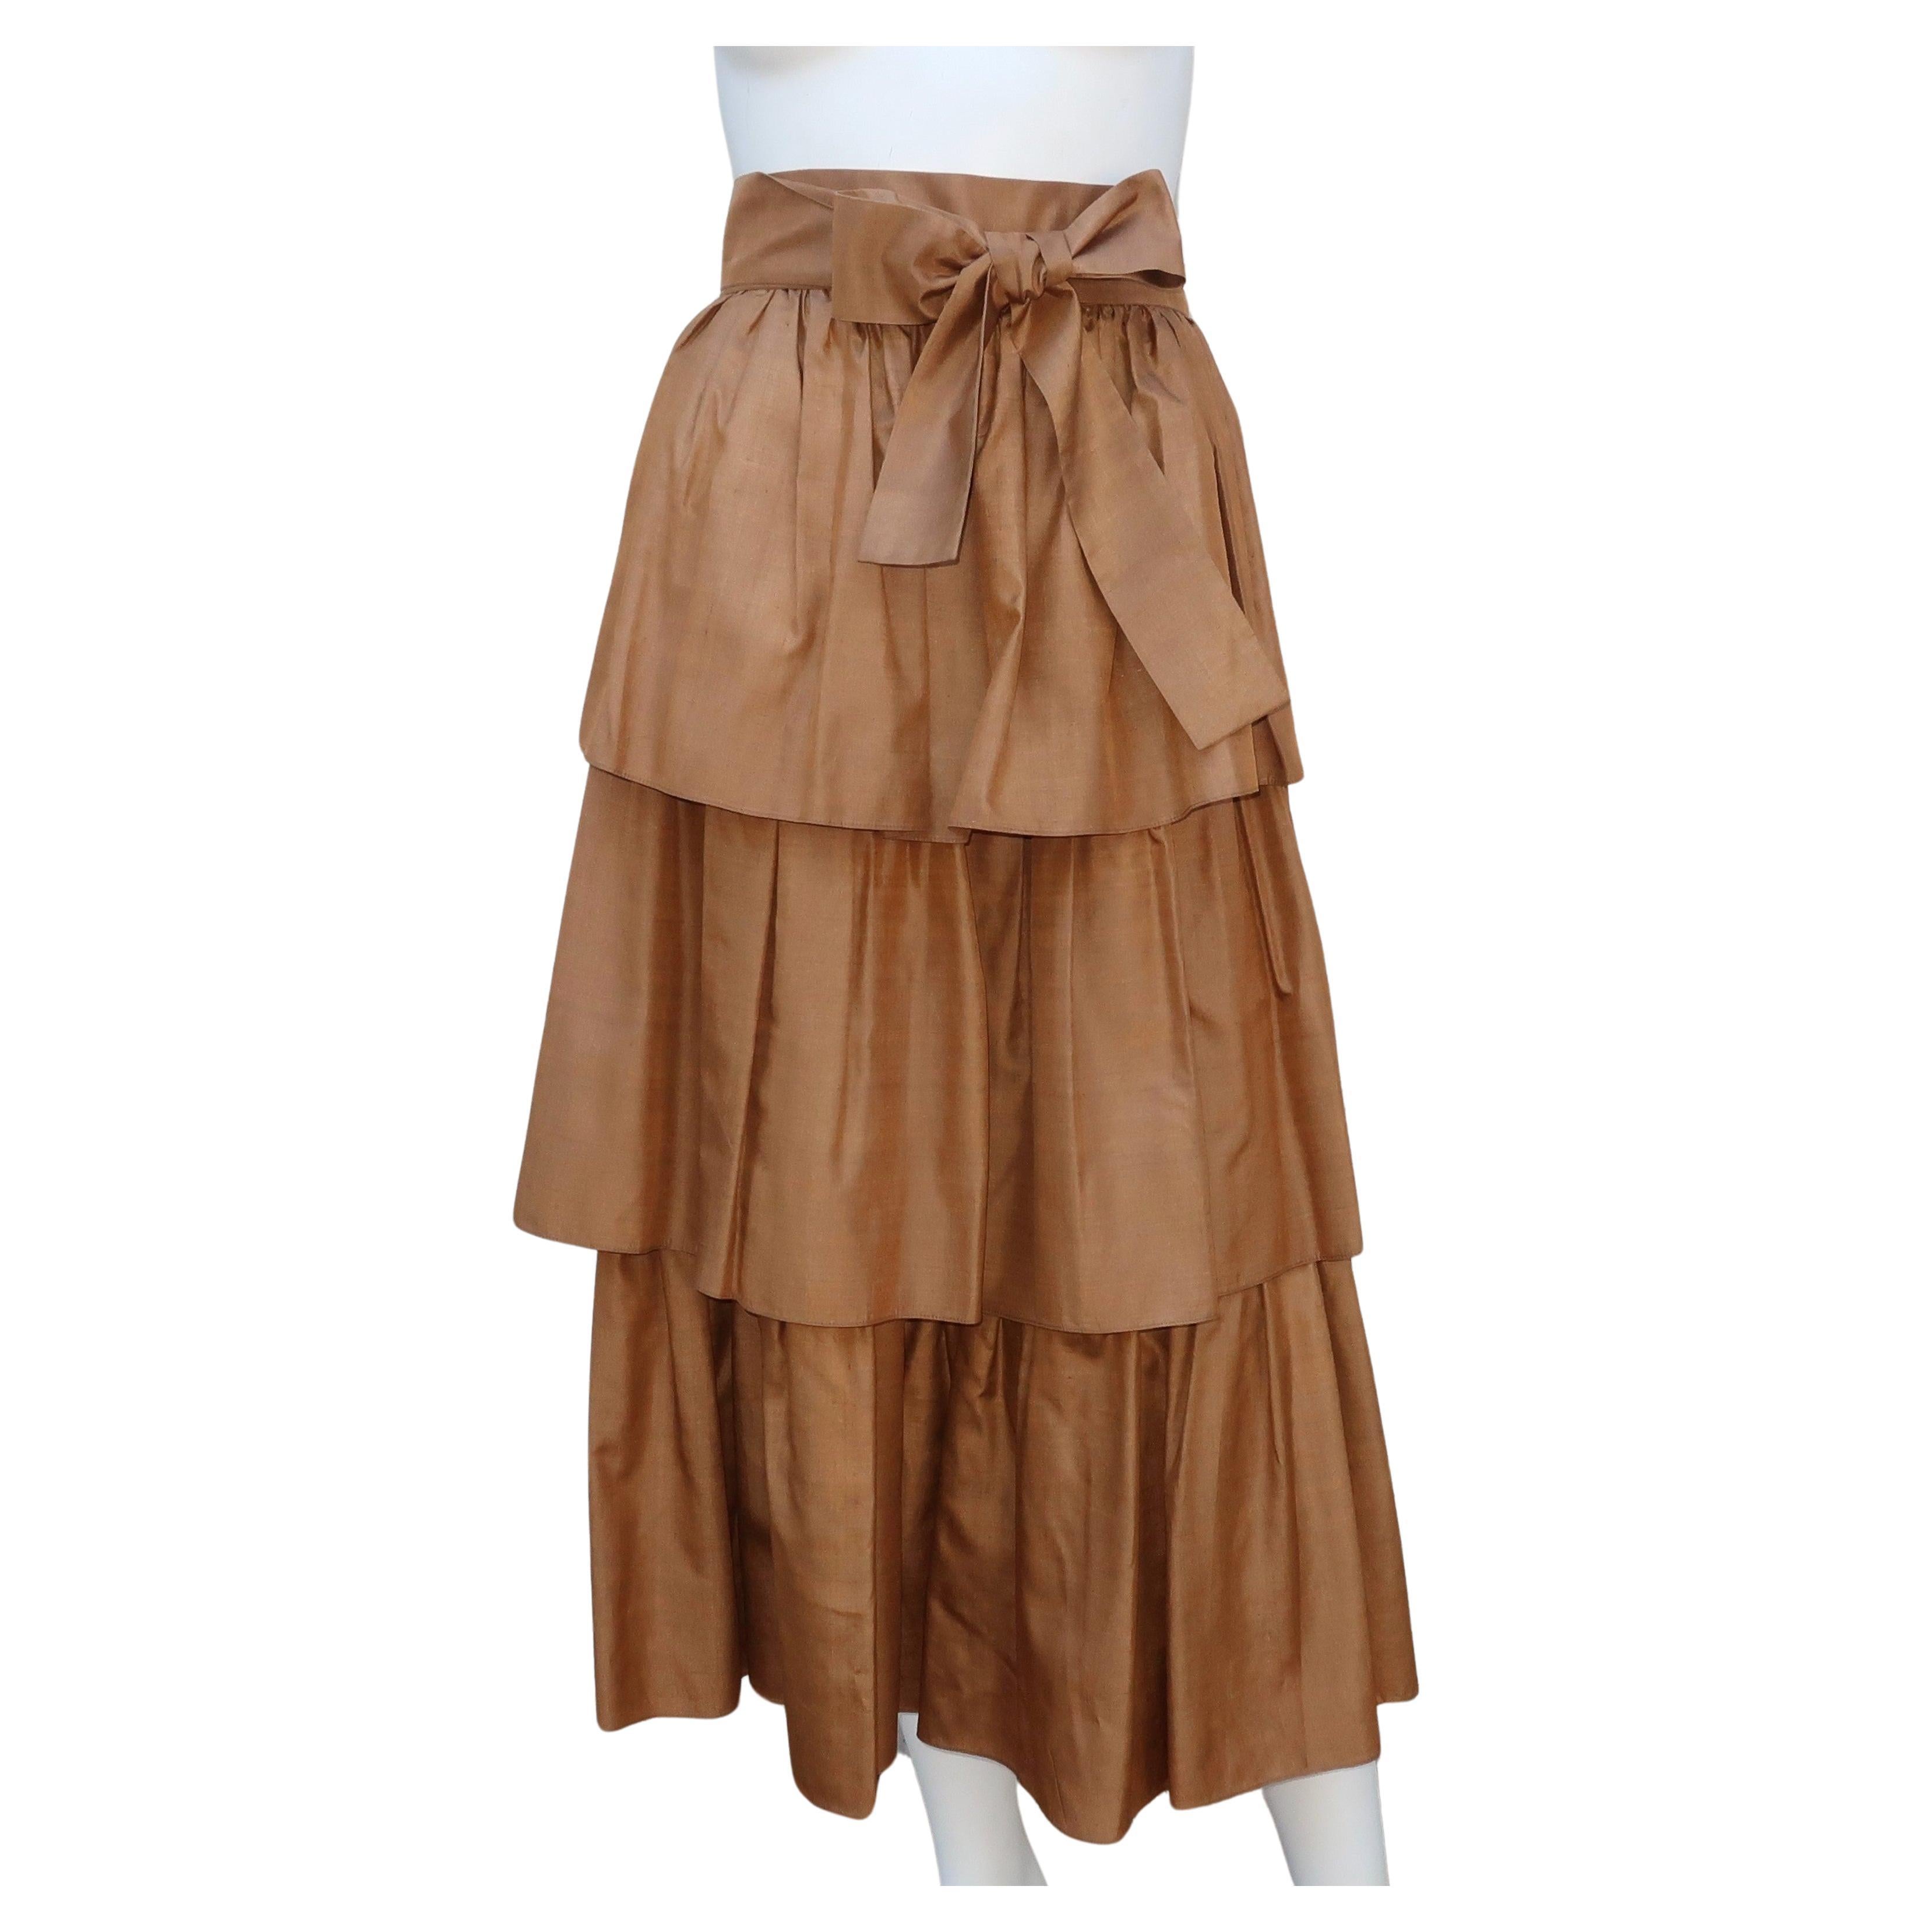 YVES SAINT LAURENT Rive Gauche Silk Tiered Peasant Skirt, 1970's For Sale